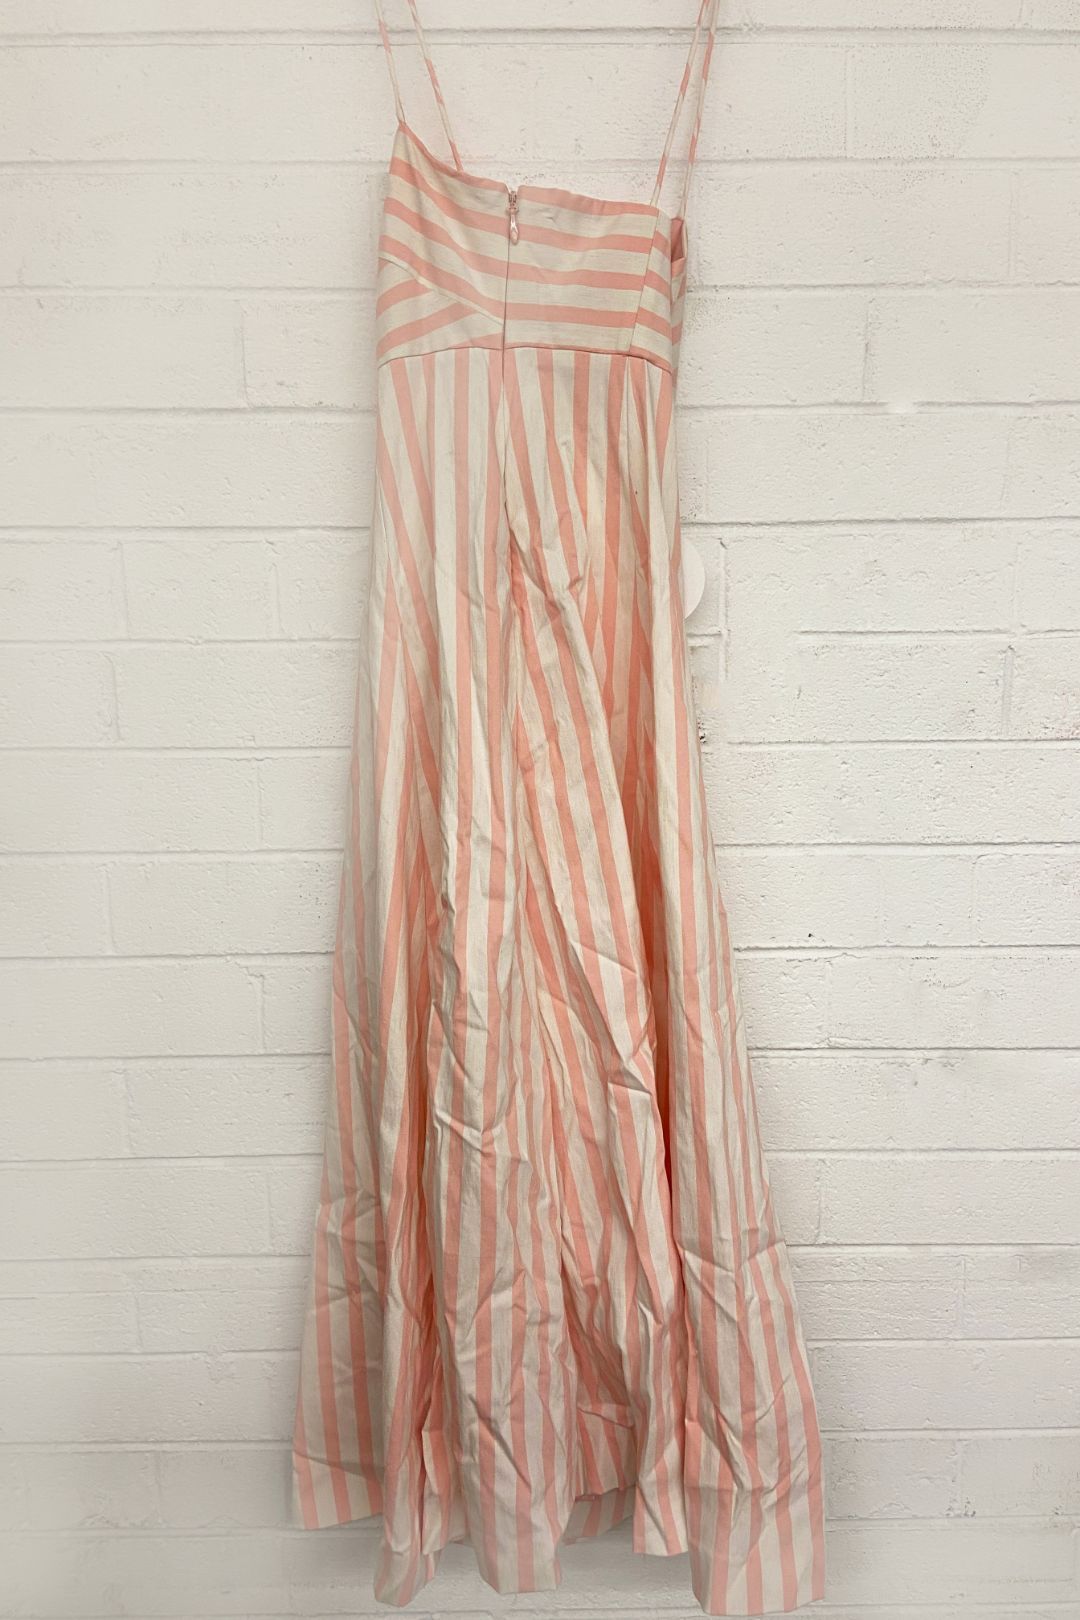 Sheike Ashley Dress in Pink and White Stripe